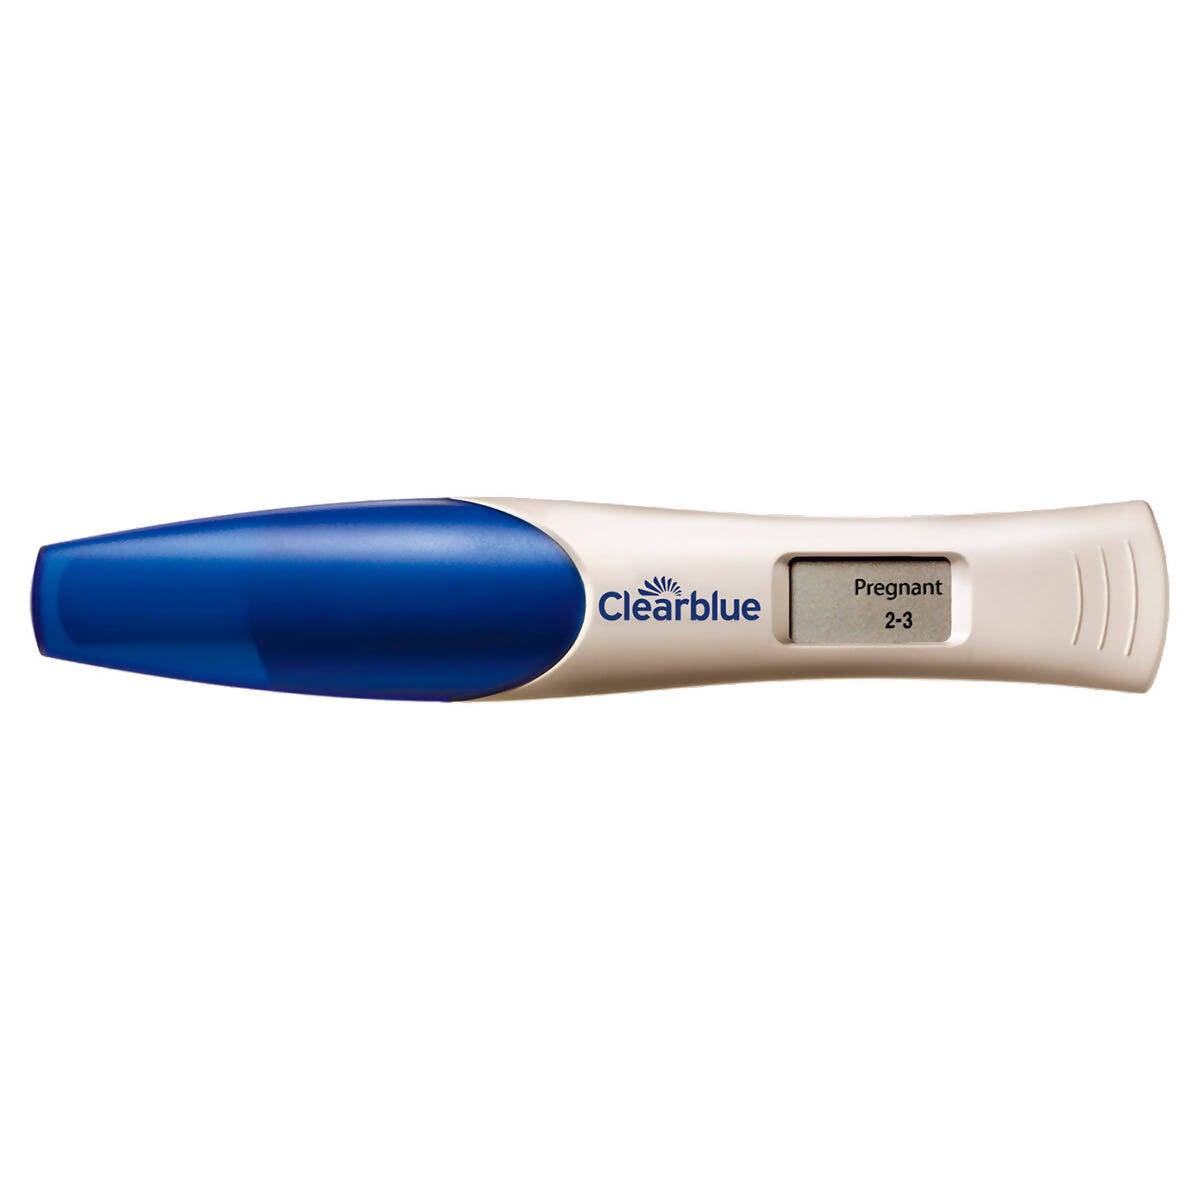 Clearblue Digital Pregnancy Test Sticks, 2x2 count Family Planning & Sexual Health Costco UK   